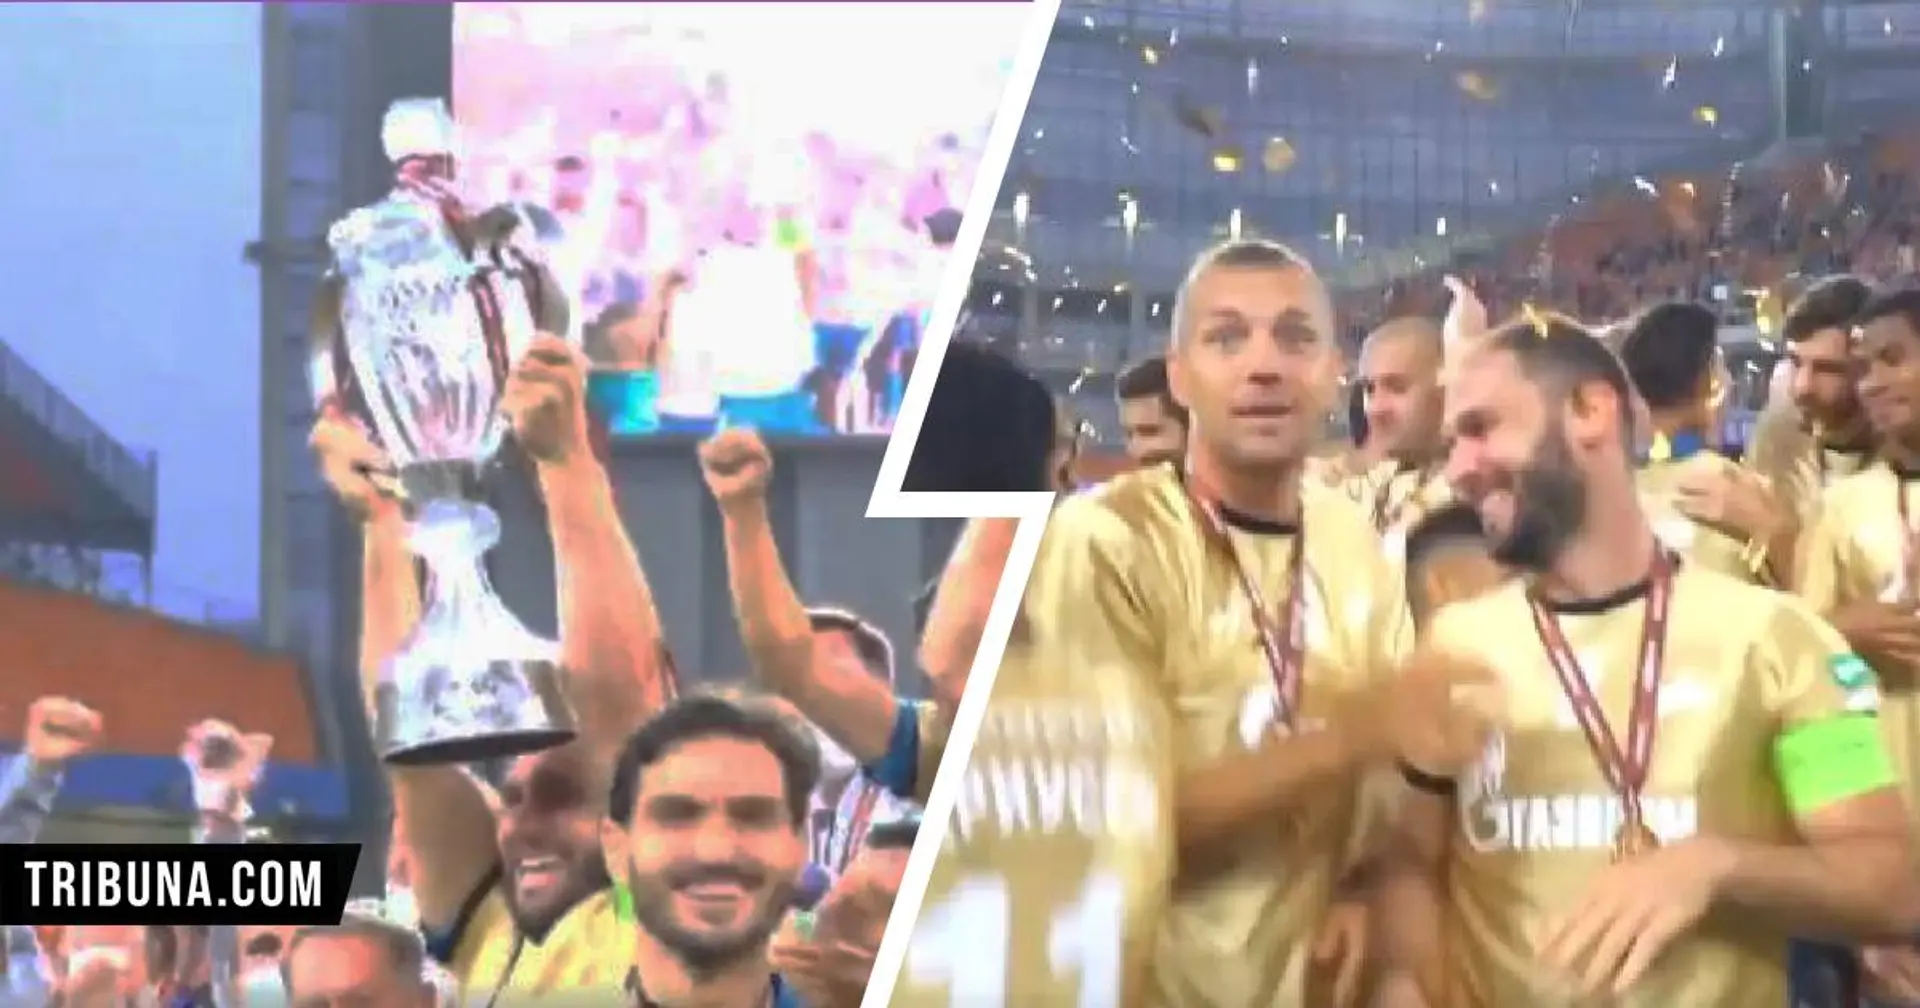 Oops - former Blue Ivanovic drops, breaks glass Russian Cup trophy during wild celebrations (video)